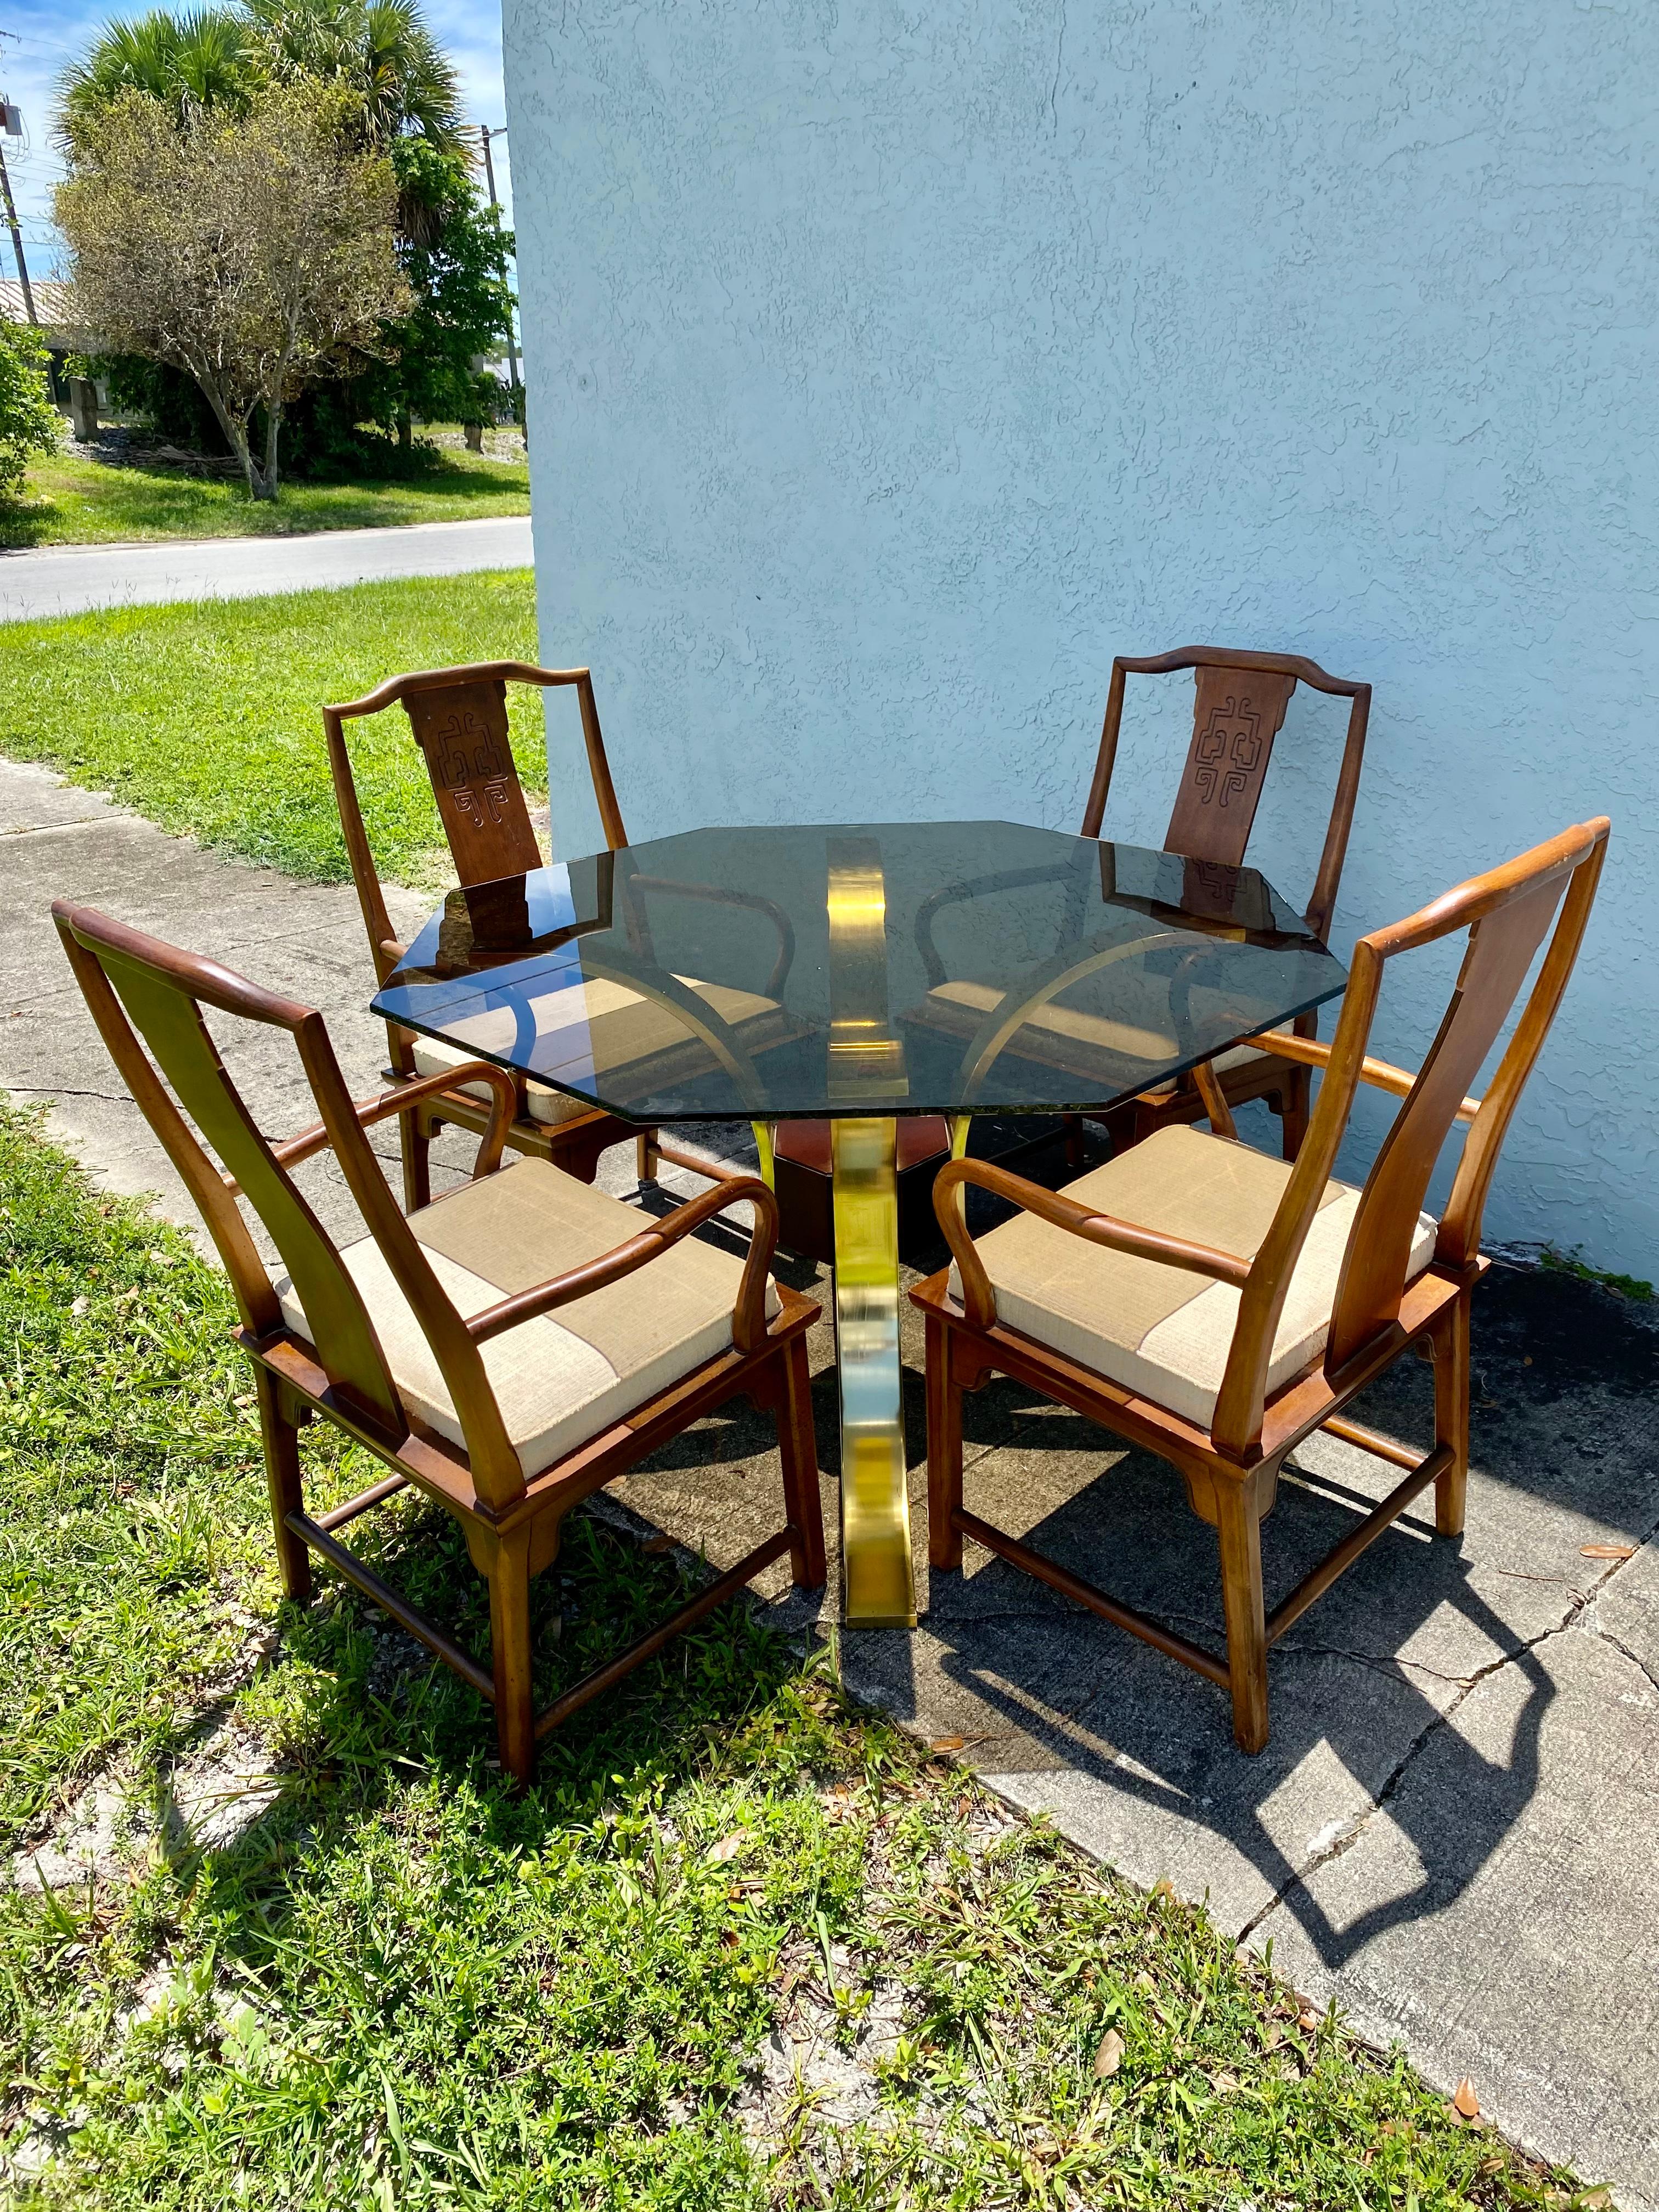 On offer on this occasion is one of the most stunning, dining set you could hope to find. This is an ultra-rare opportunity to acquire what is, unequivocally, the best of the best, it being a most spectacular and beautifully-presented chairs.